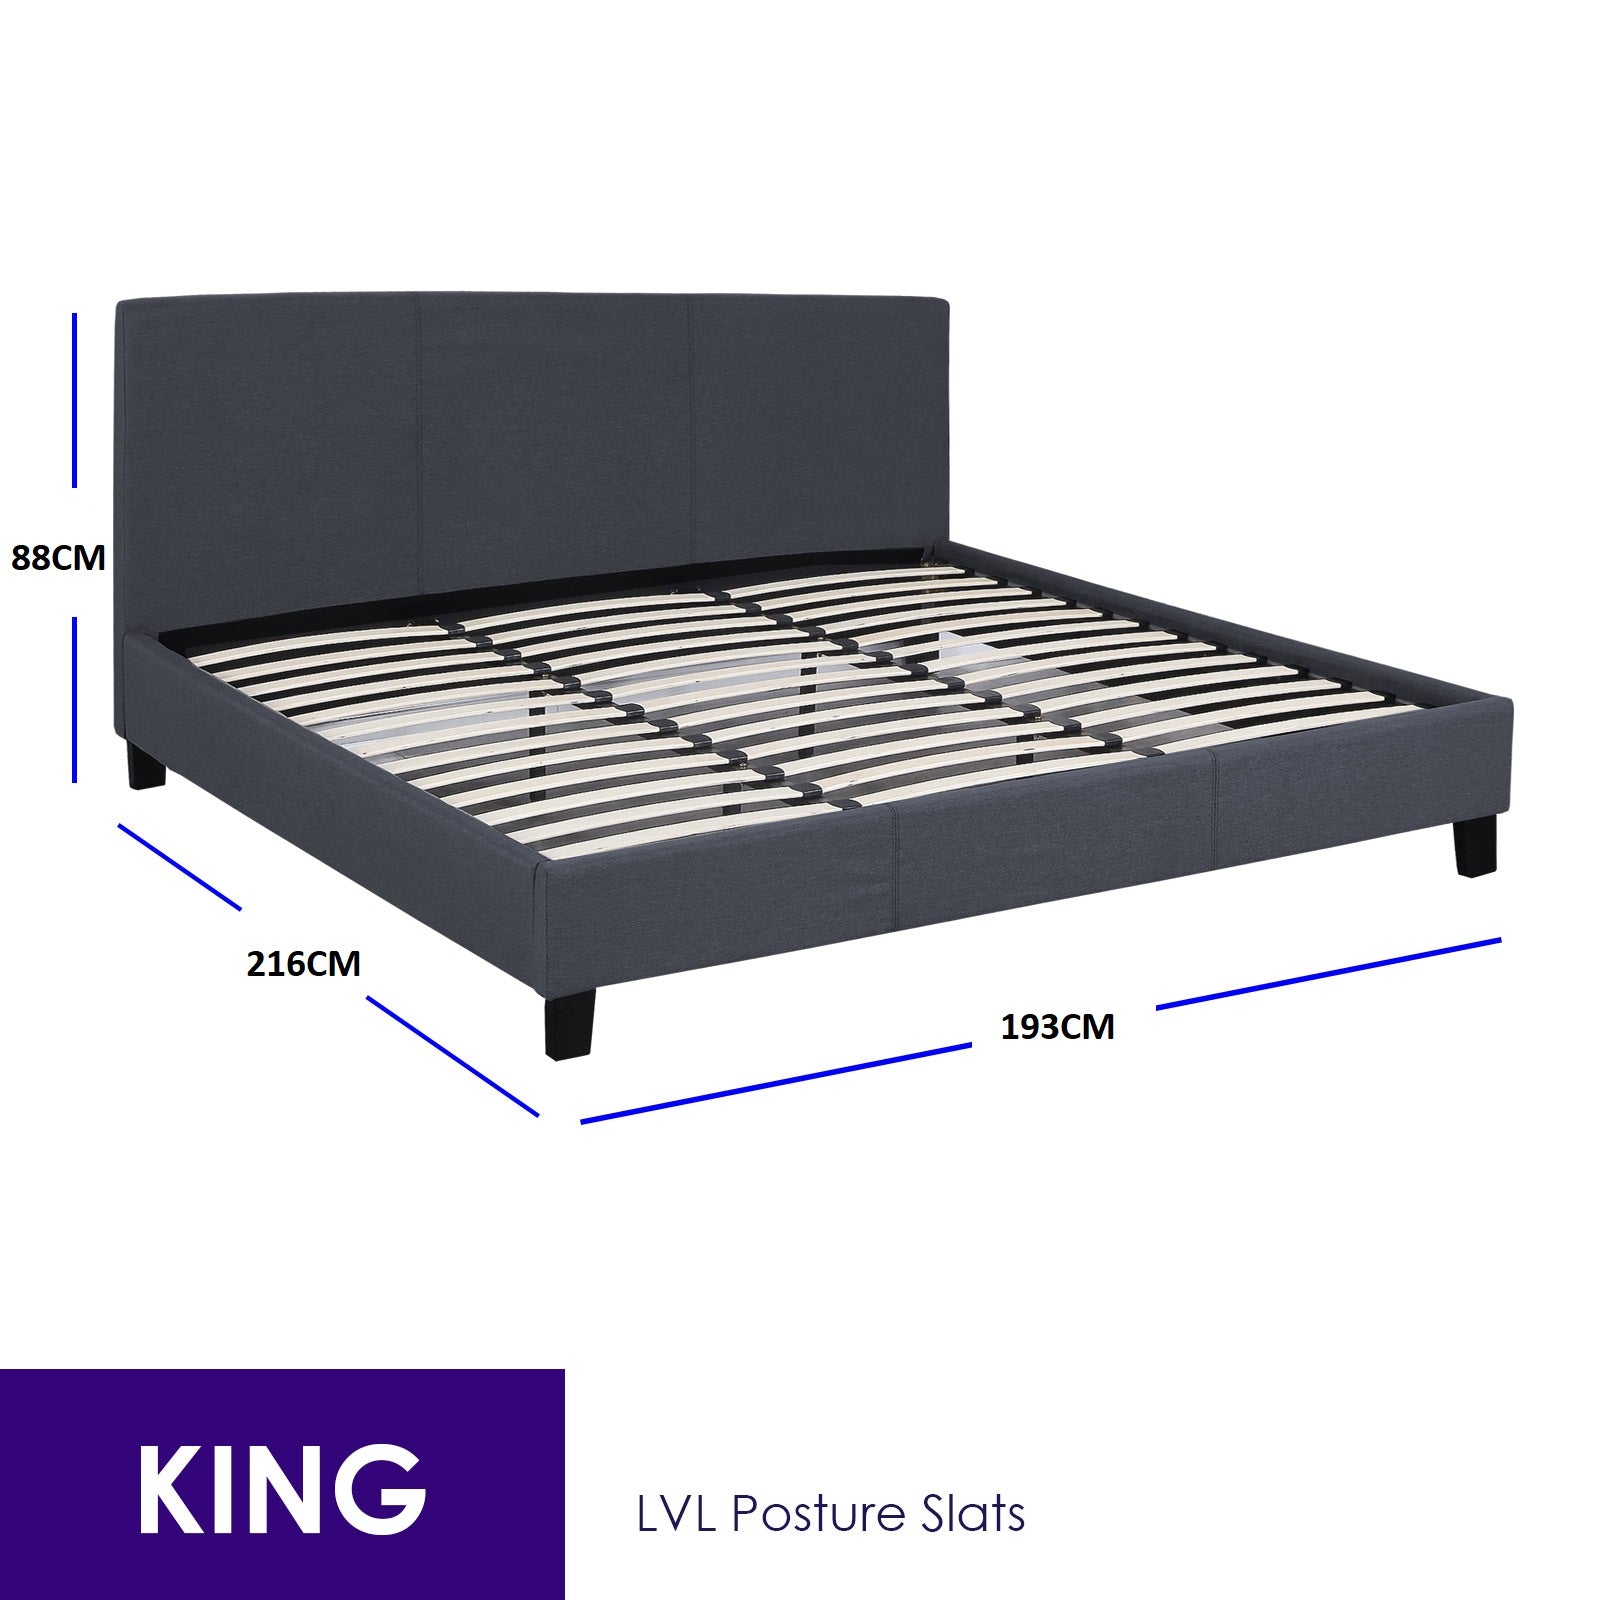 Milano Sienna Luxury Bed with Headboard (Model 2) - Charcoal No.35 - King